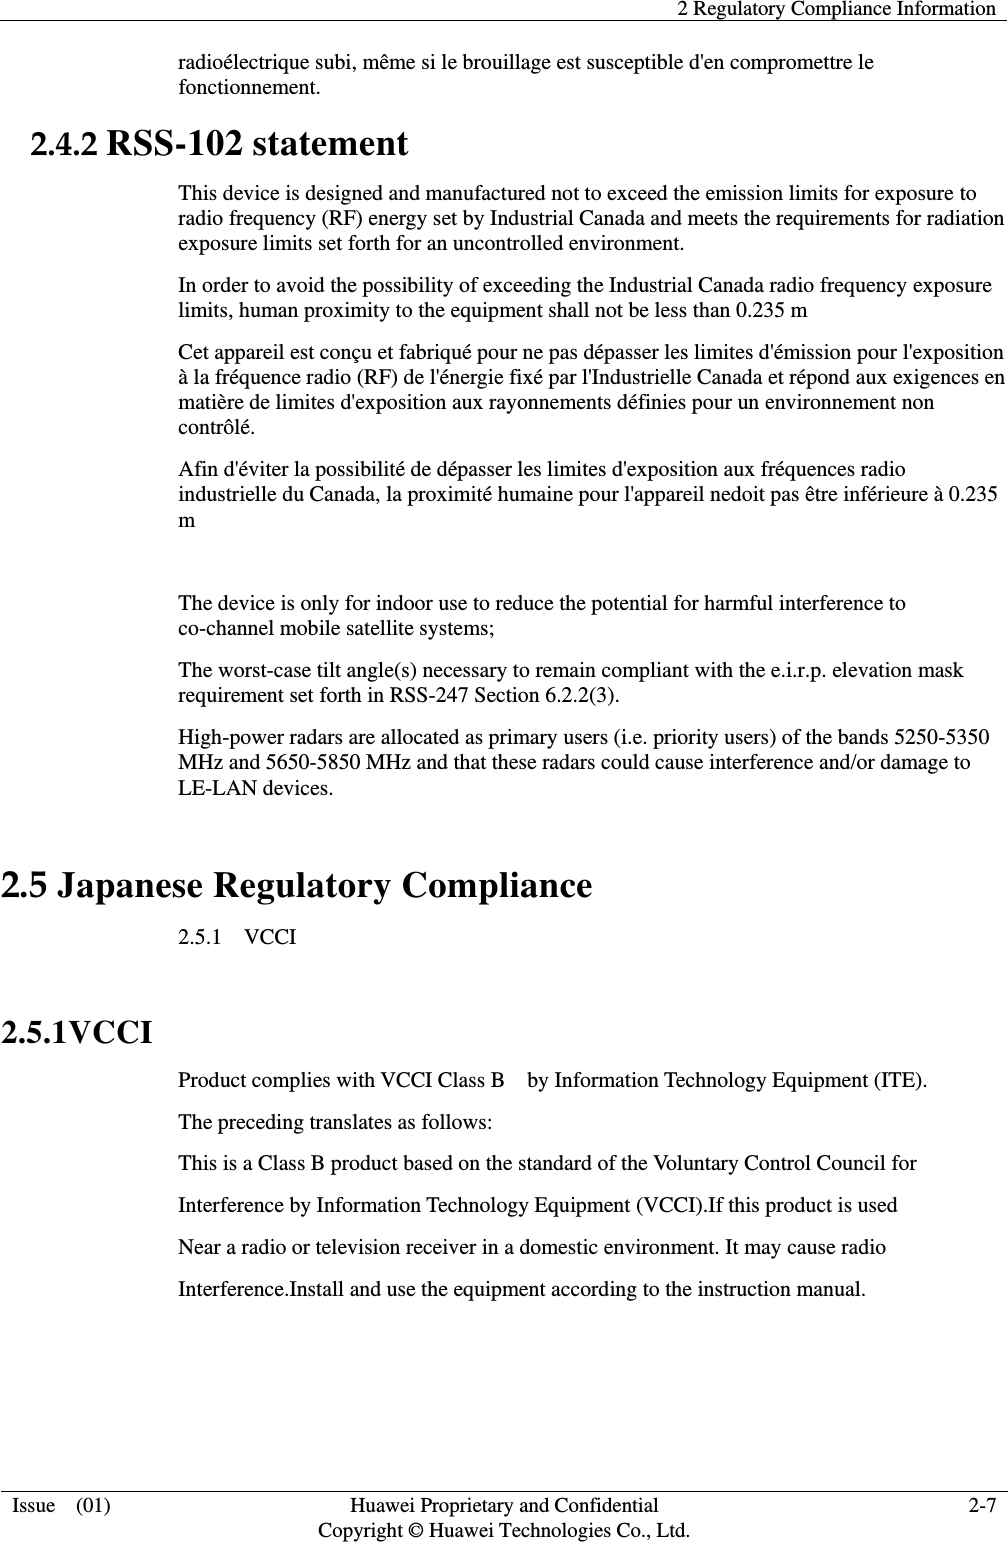   2 Regulatory Compliance Information  Issue    (01) Huawei Proprietary and Confidential                                     Copyright © Huawei Technologies Co., Ltd. 2-7  radioélectrique subi, même si le brouillage est susceptible d&apos;en compromettre le fonctionnement. 2.4.2 RSS-102 statement This device is designed and manufactured not to exceed the emission limits for exposure to radio frequency (RF) energy set by Industrial Canada and meets the requirements for radiation exposure limits set forth for an uncontrolled environment. In order to avoid the possibility of exceeding the Industrial Canada radio frequency exposure limits, human proximity to the equipment shall not be less than 0.235 m Cet appareil est conçu et fabriqué pour ne pas dépasser les limites d&apos;émission pour l&apos;exposition à la fréquence radio (RF) de l&apos;énergie fixé par l&apos;Industrielle Canada et répond aux exigences en matière de limites d&apos;exposition aux rayonnements définies pour un environnement non contrôlé.   Afin d&apos;éviter la possibilité de dépasser les limites d&apos;exposition aux fréquences radio industrielle du Canada, la proximité humaine pour l&apos;appareil nedoit pas être inférieure à 0.235 m  The device is only for indoor use to reduce the potential for harmful interference to co-channel mobile satellite systems;   The worst-case tilt angle(s) necessary to remain compliant with the e.i.r.p. elevation mask requirement set forth in RSS-247 Section 6.2.2(3).   High-power radars are allocated as primary users (i.e. priority users) of the bands 5250-5350 MHz and 5650-5850 MHz and that these radars could cause interference and/or damage to LE-LAN devices.   2.5 Japanese Regulatory Compliance 2.5.1    VCCI  2.5.1VCCI Product complies with VCCI Class B    by Information Technology Equipment (ITE). The preceding translates as follows: This is a Class B product based on the standard of the Voluntary Control Council for Interference by Information Technology Equipment (VCCI).If this product is used Near a radio or television receiver in a domestic environment. It may cause radio Interference.Install and use the equipment according to the instruction manual.   